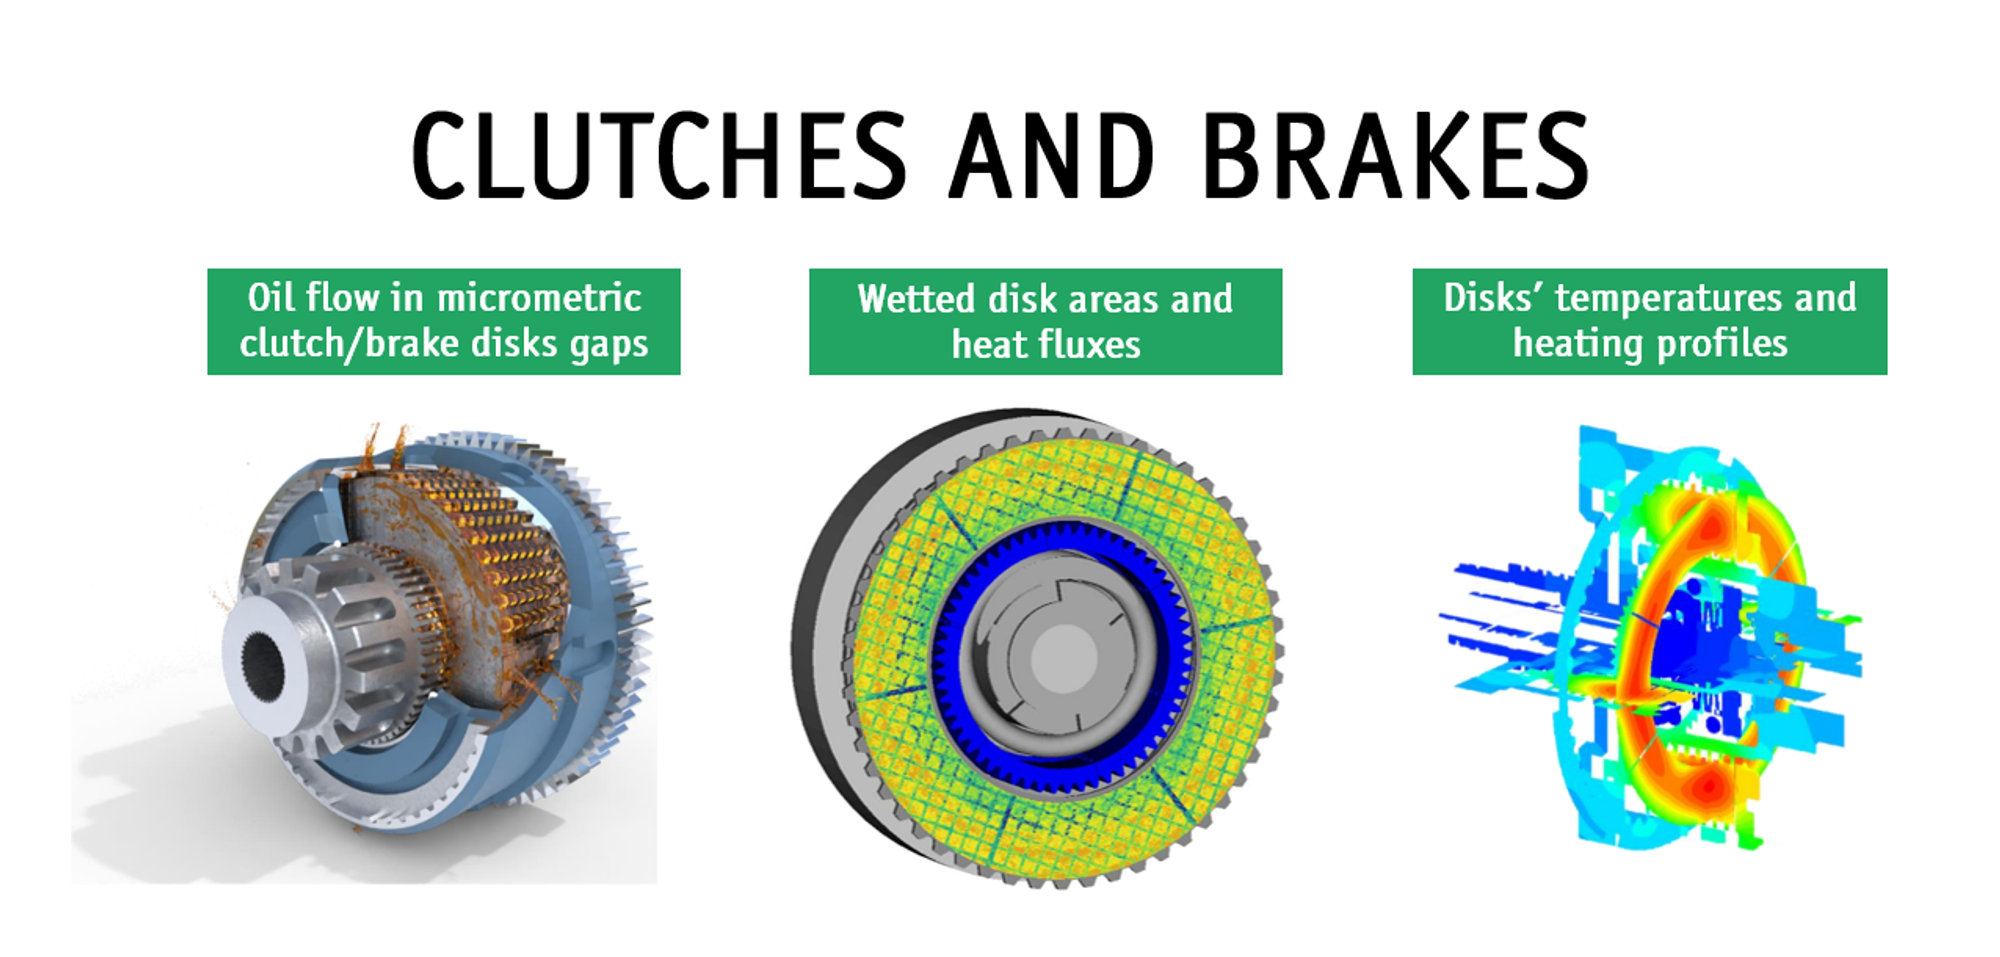 CLUTCHES AND BRAKES